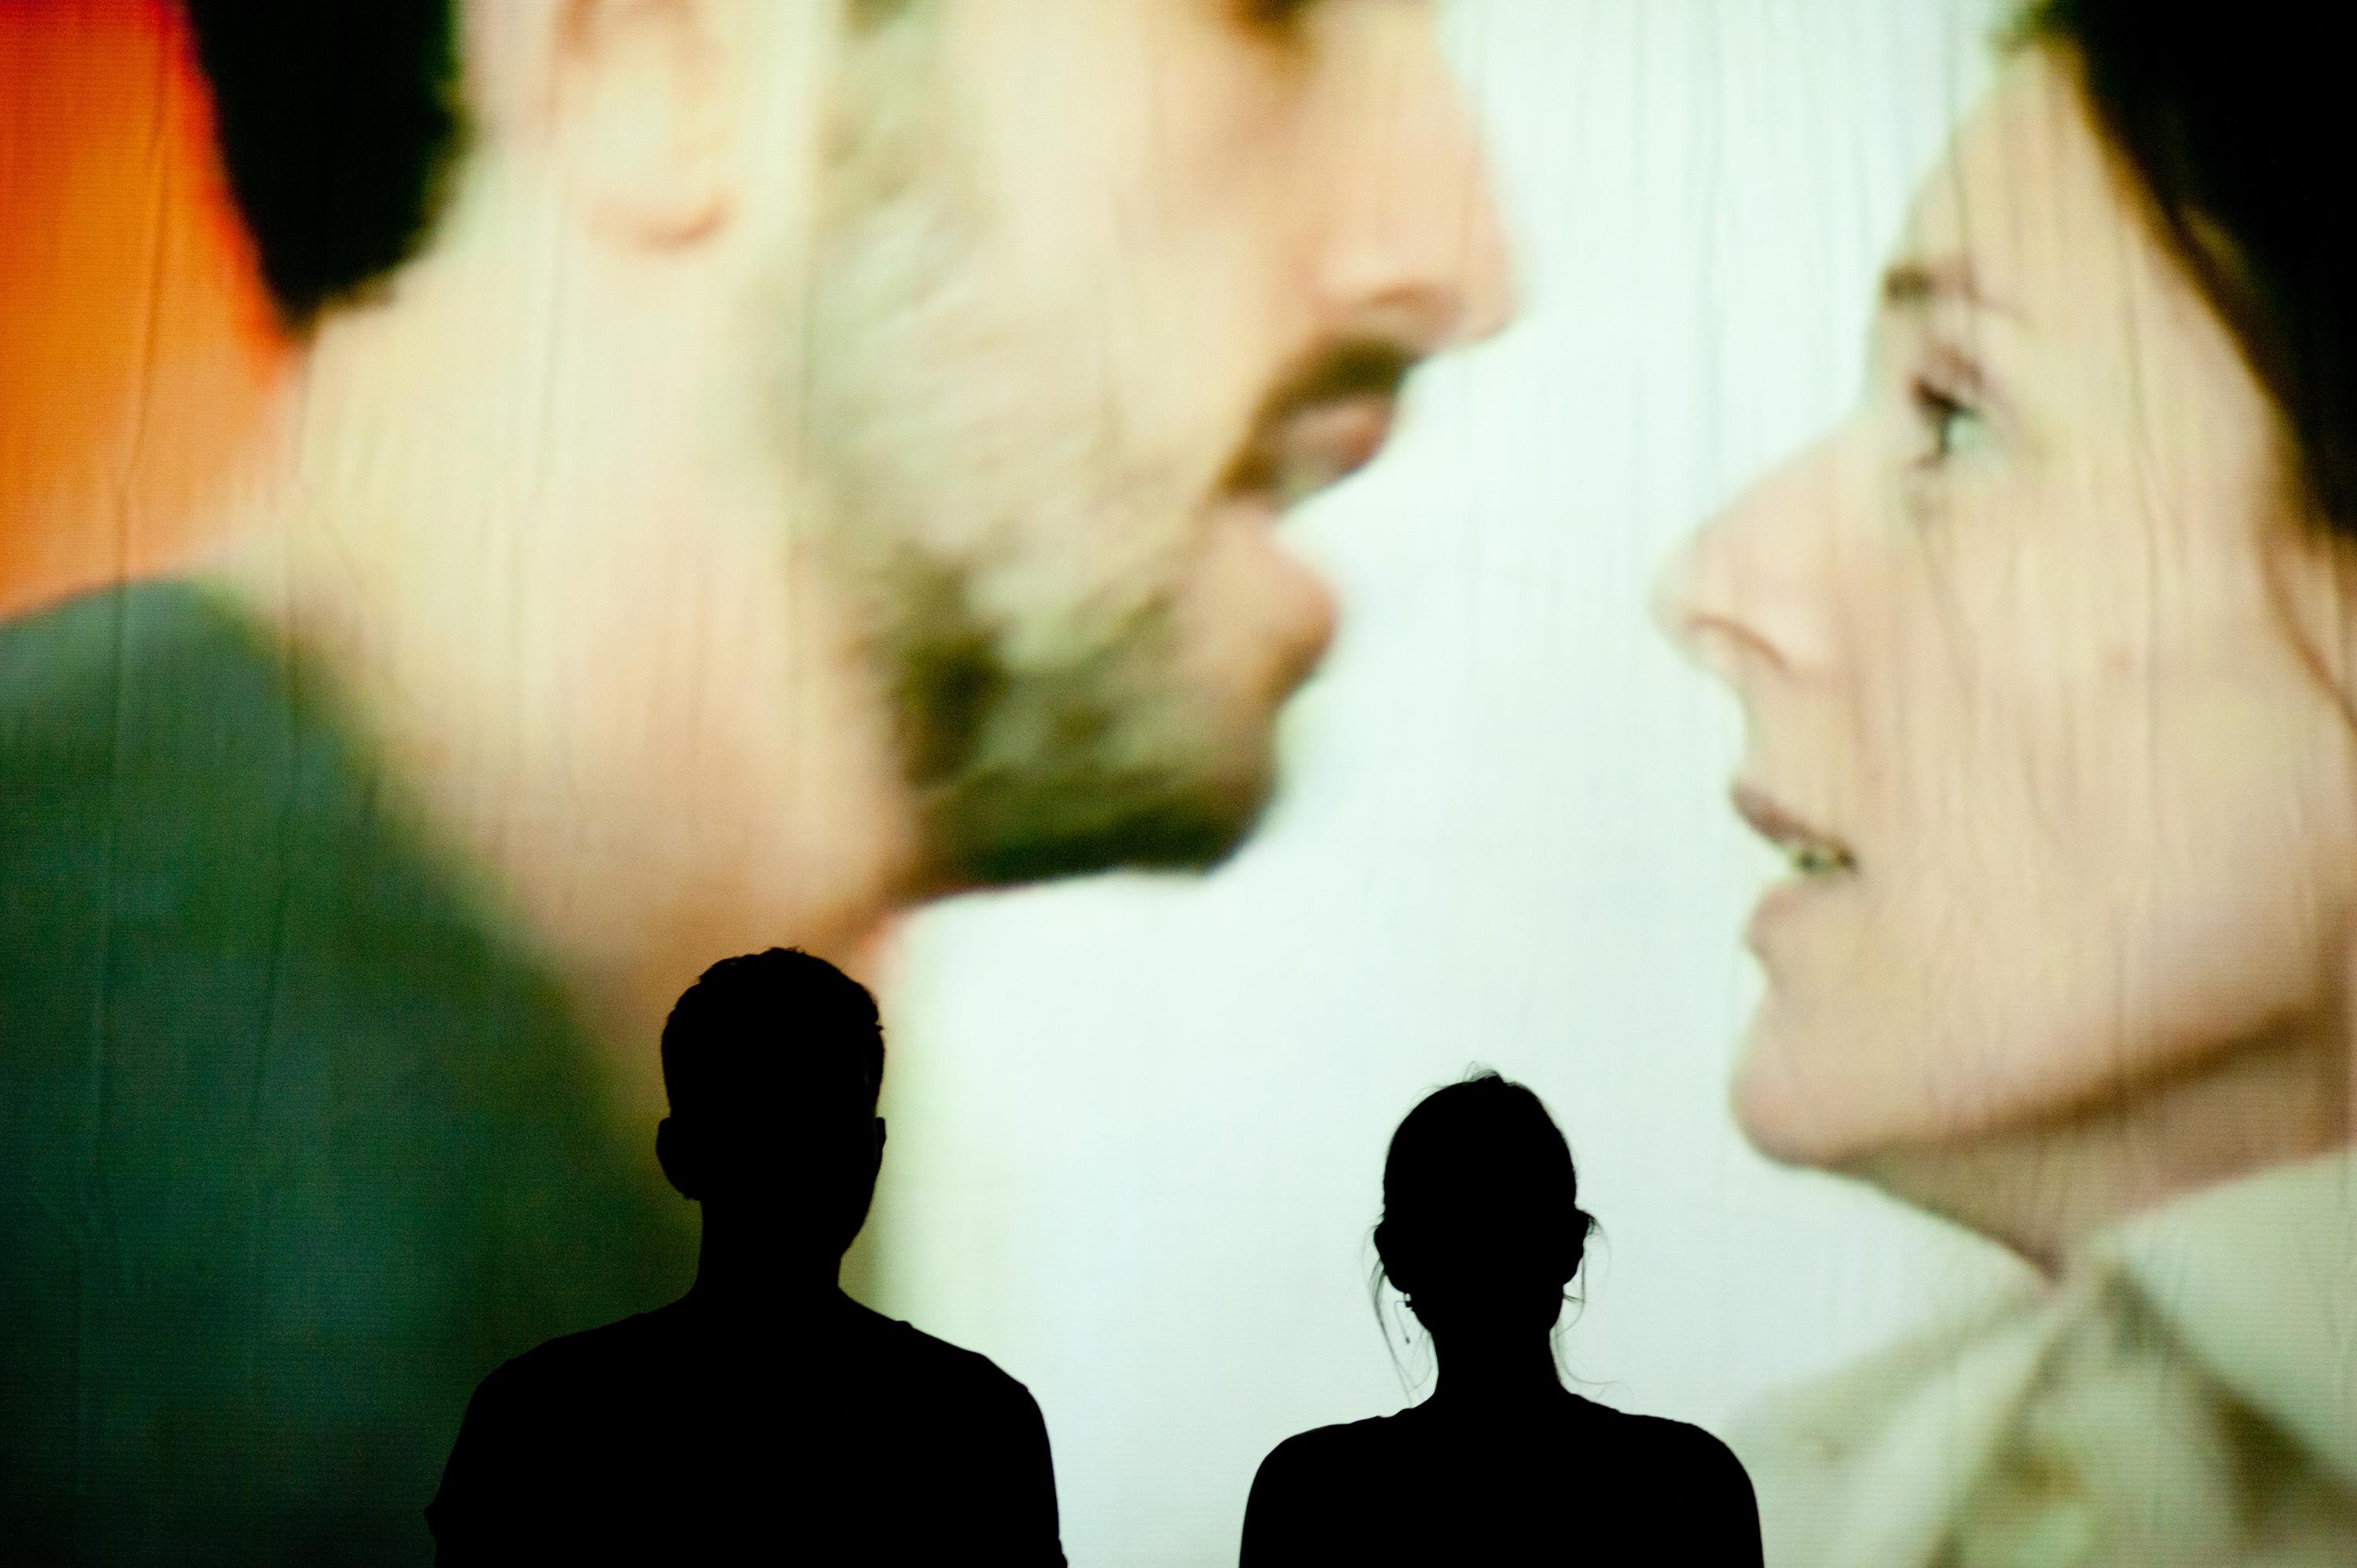 Silhouettes of two viewers watching a large video installation of a man and woman mid conversation.